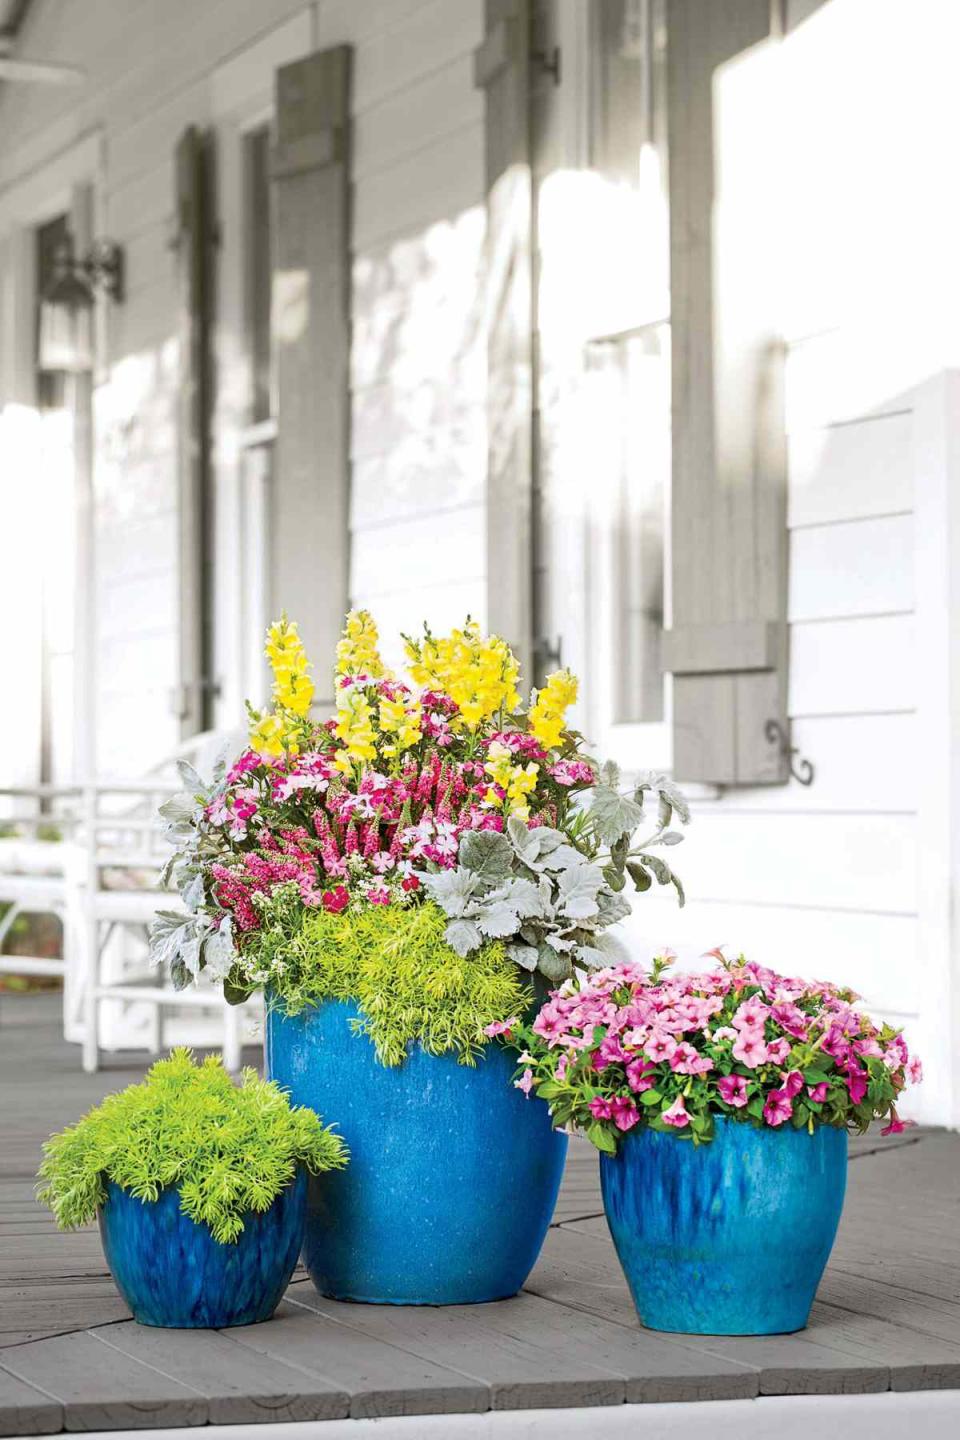 Use Brightly Colored Pots